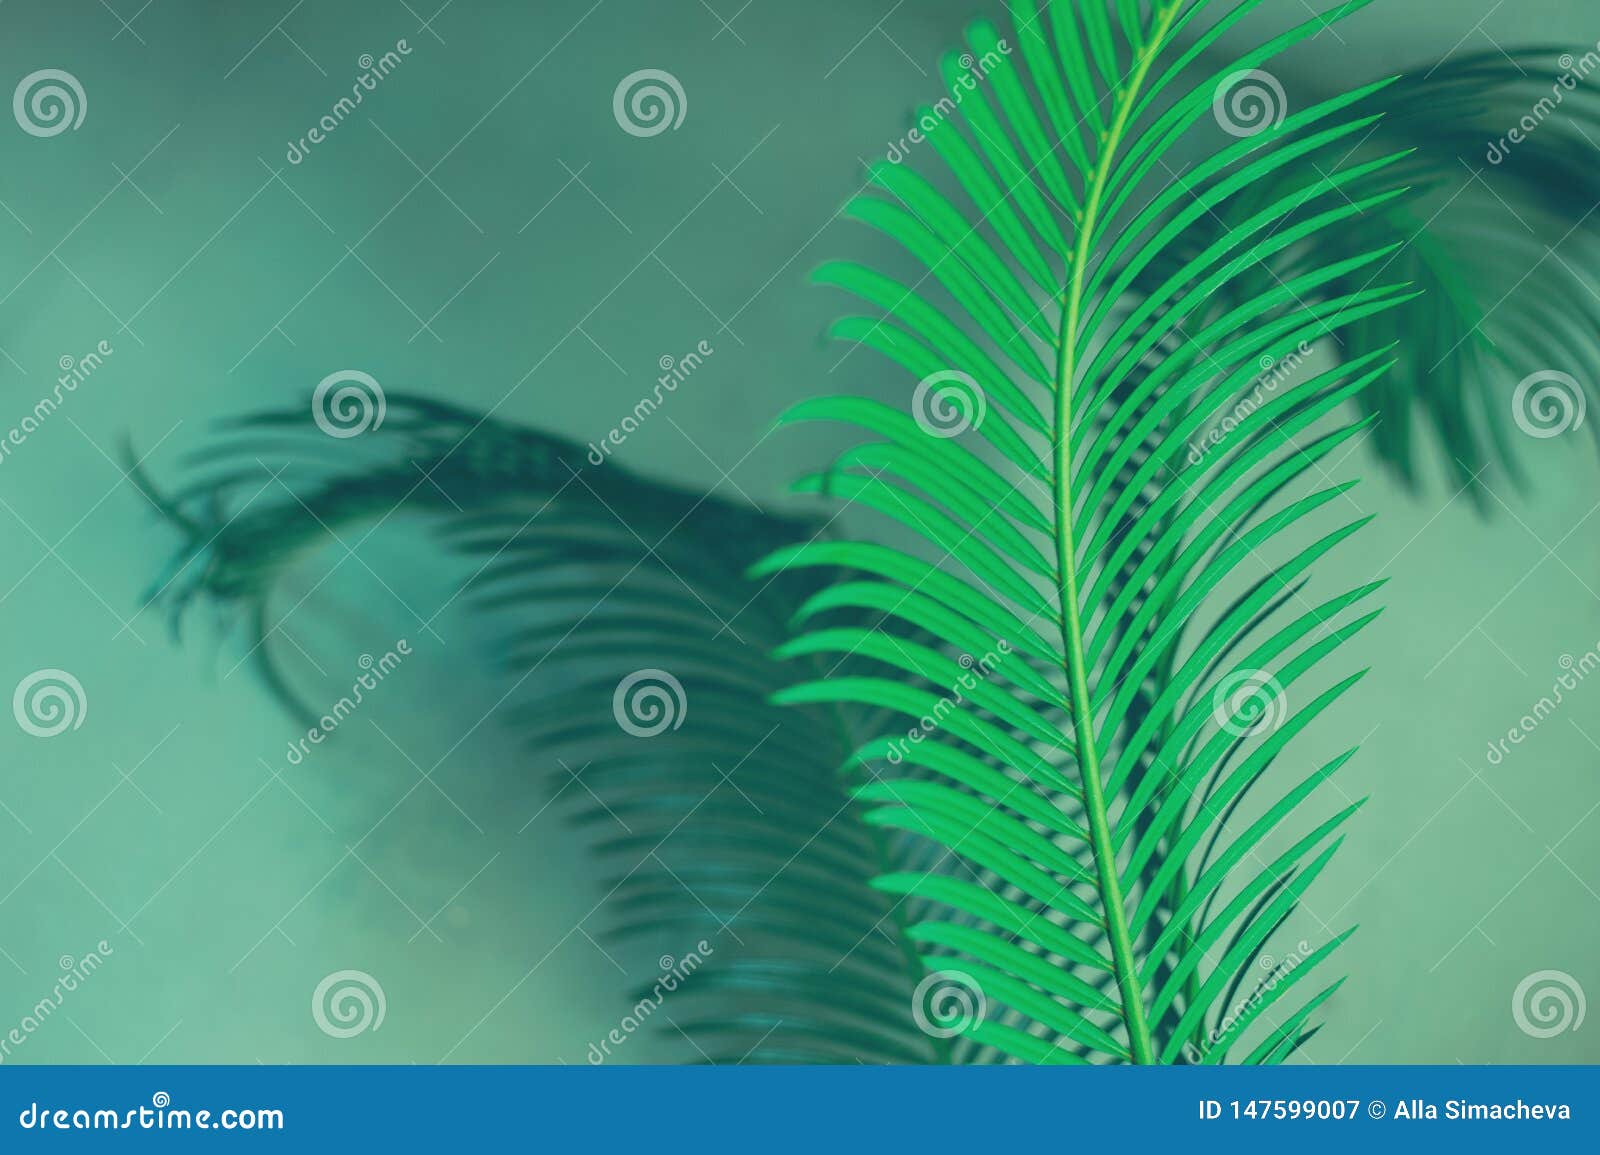 Green Leaves of Palm Tree on Dark Green Background Stock Image - Image